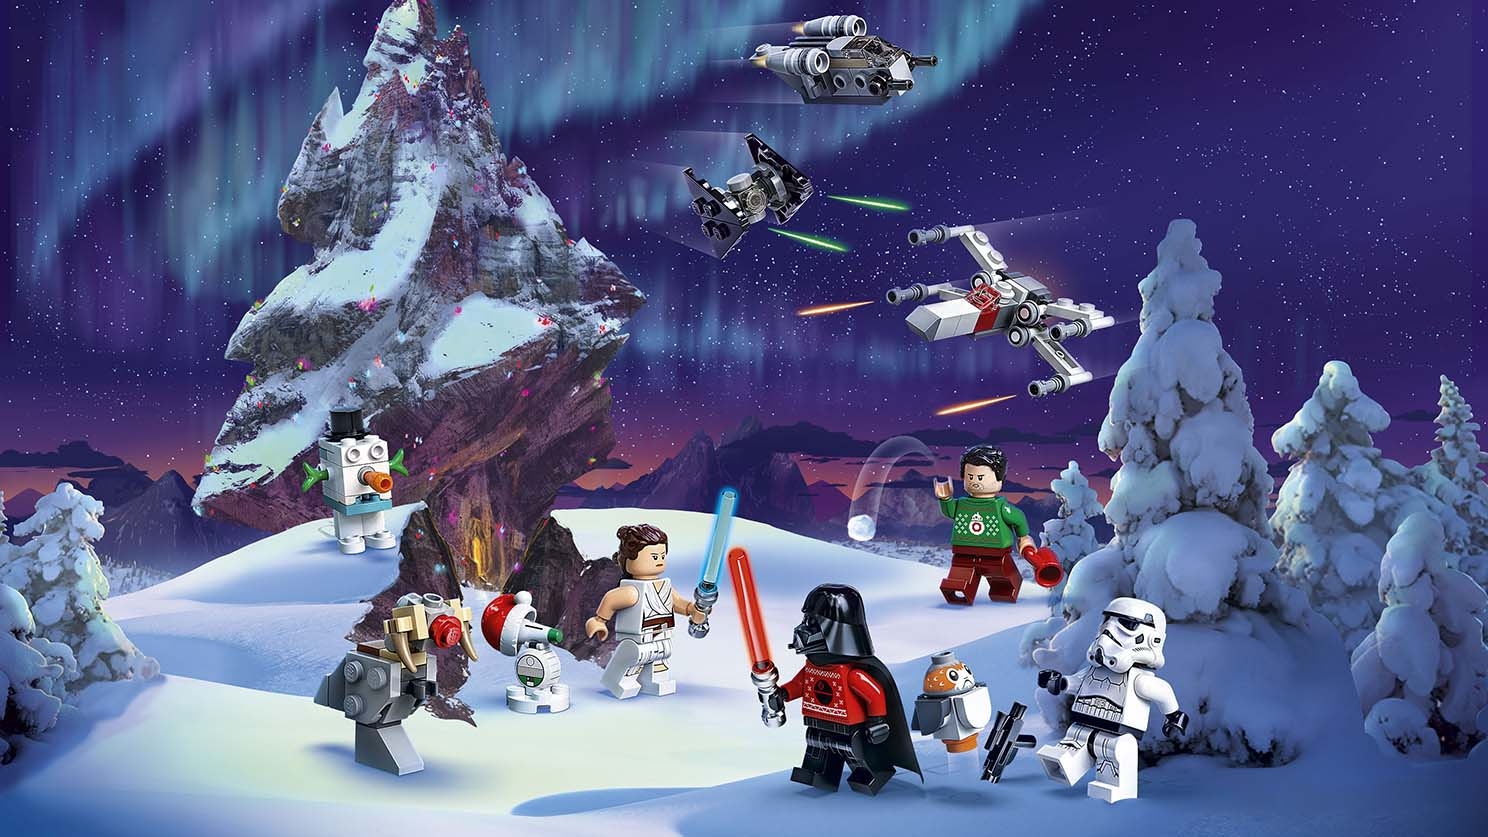 LEGO Star Wars 2020 Advent Calendar 75279 Building Kit for Kids, Fun  Calendar with Star Wars Buildable Toys Plus Code to Unlock Character in  Star